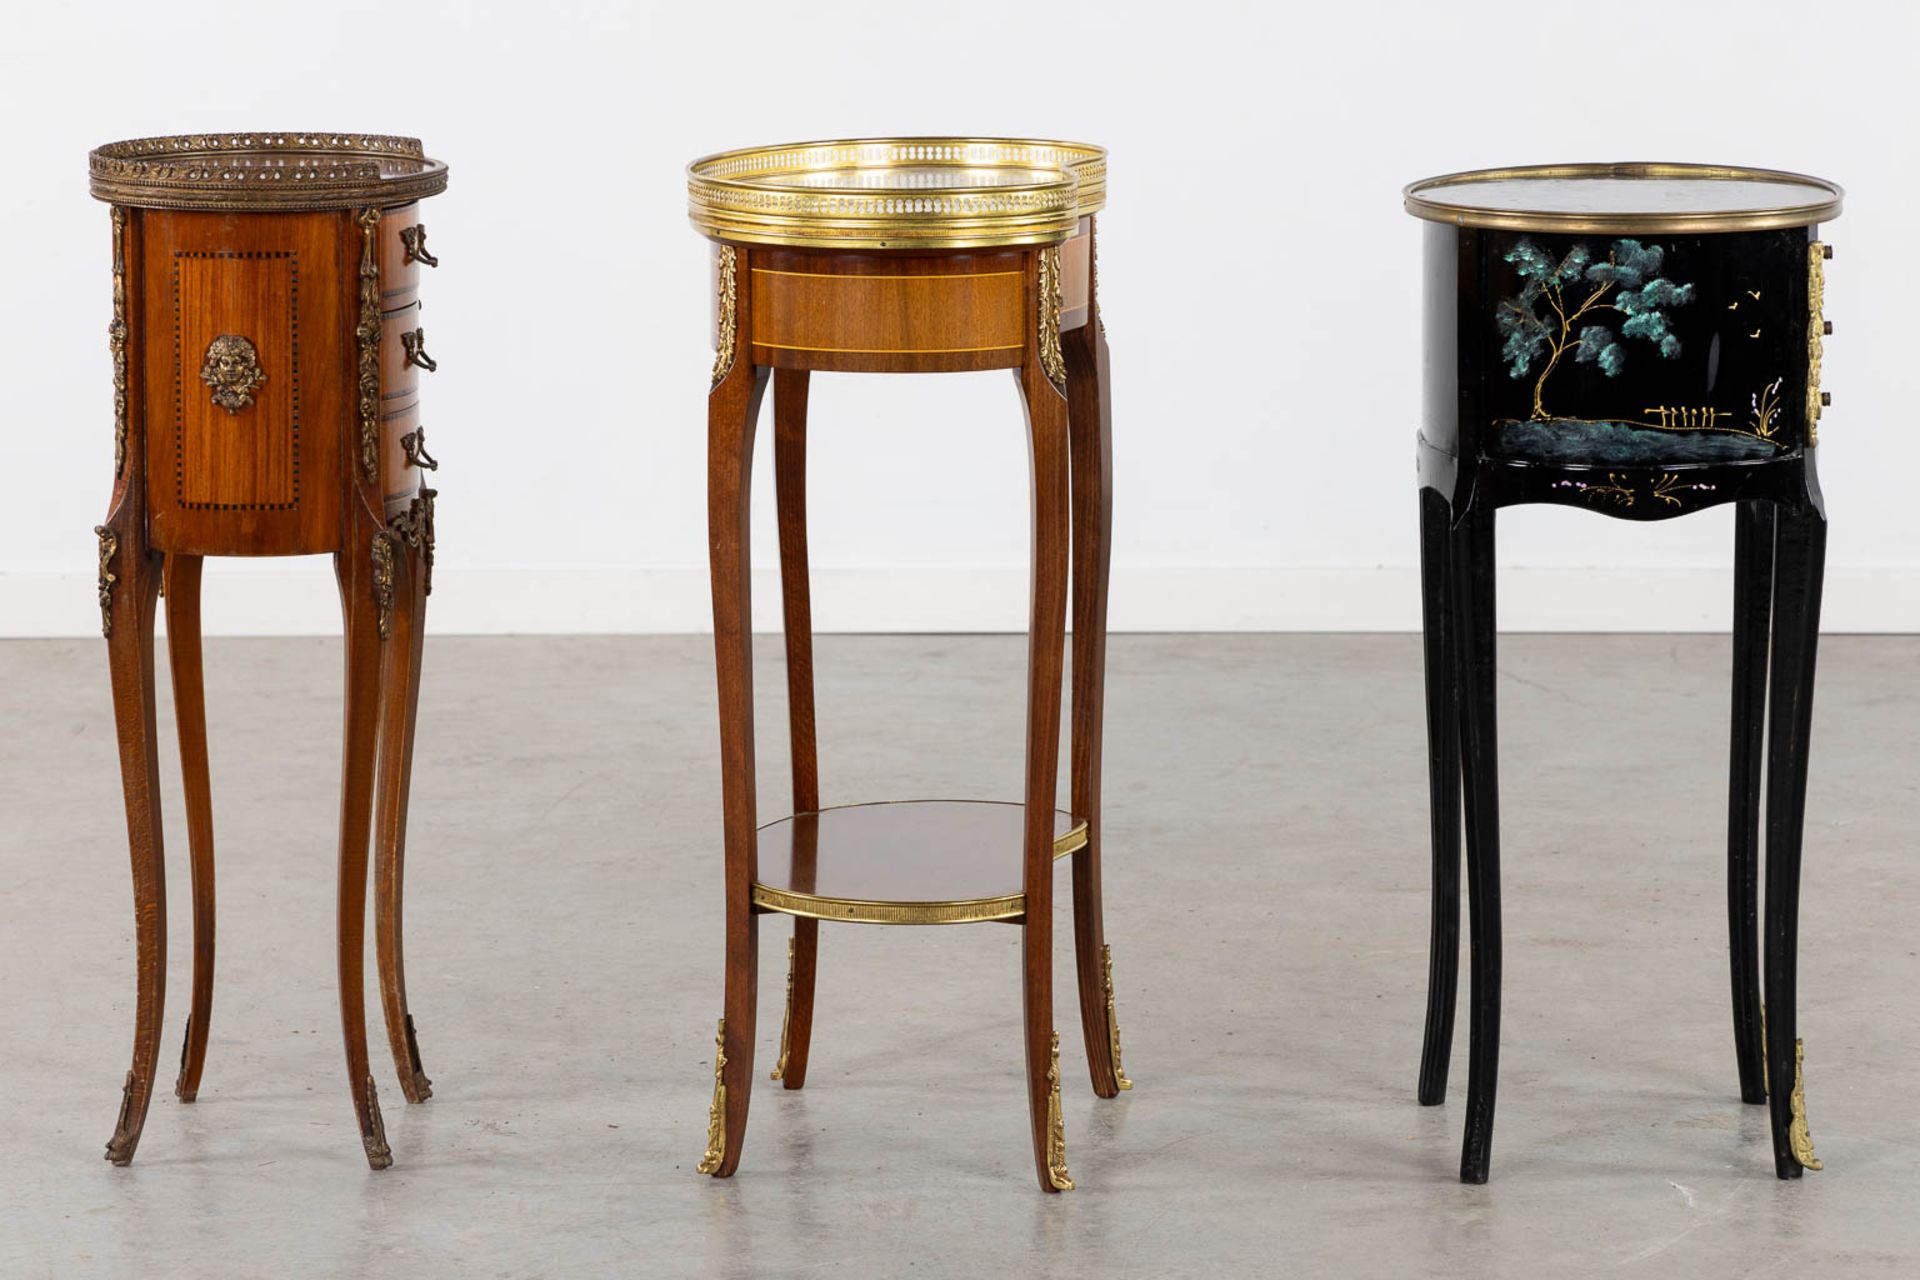 Three small side tables, marquetry and painted decor. 20th C. (L:30 x W:44 x H:71 cm) - Image 5 of 14